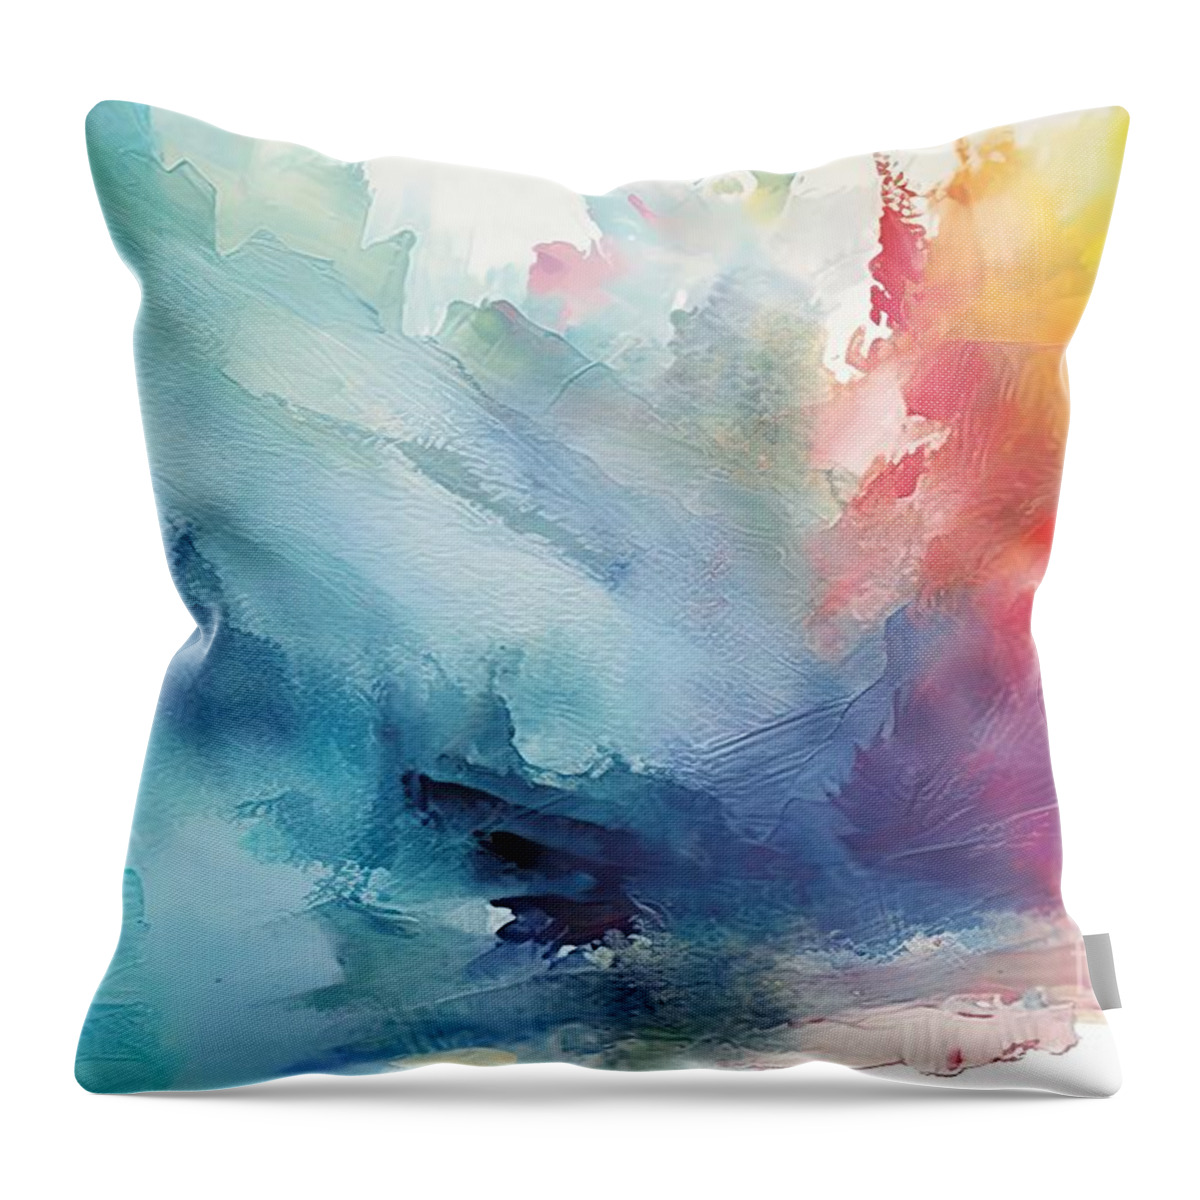 Brush Throw Pillow featuring the painting Abstract acrylic and watercolor brush strokes painted background #1 by N Akkash